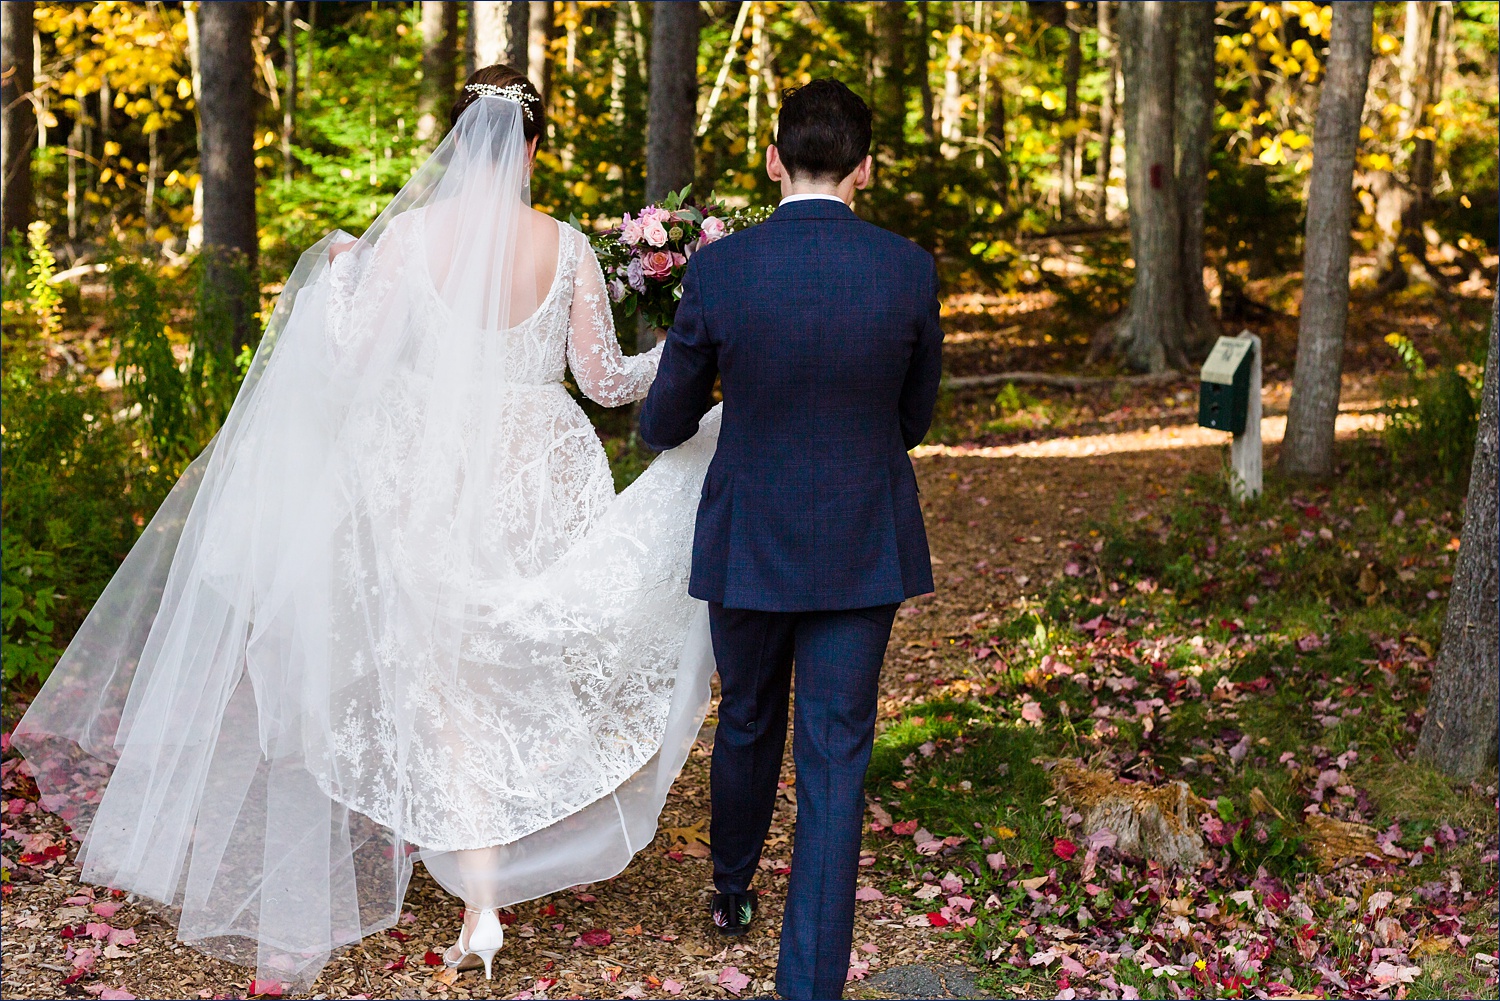 The bride heads to the first look with help from her brother in the woods